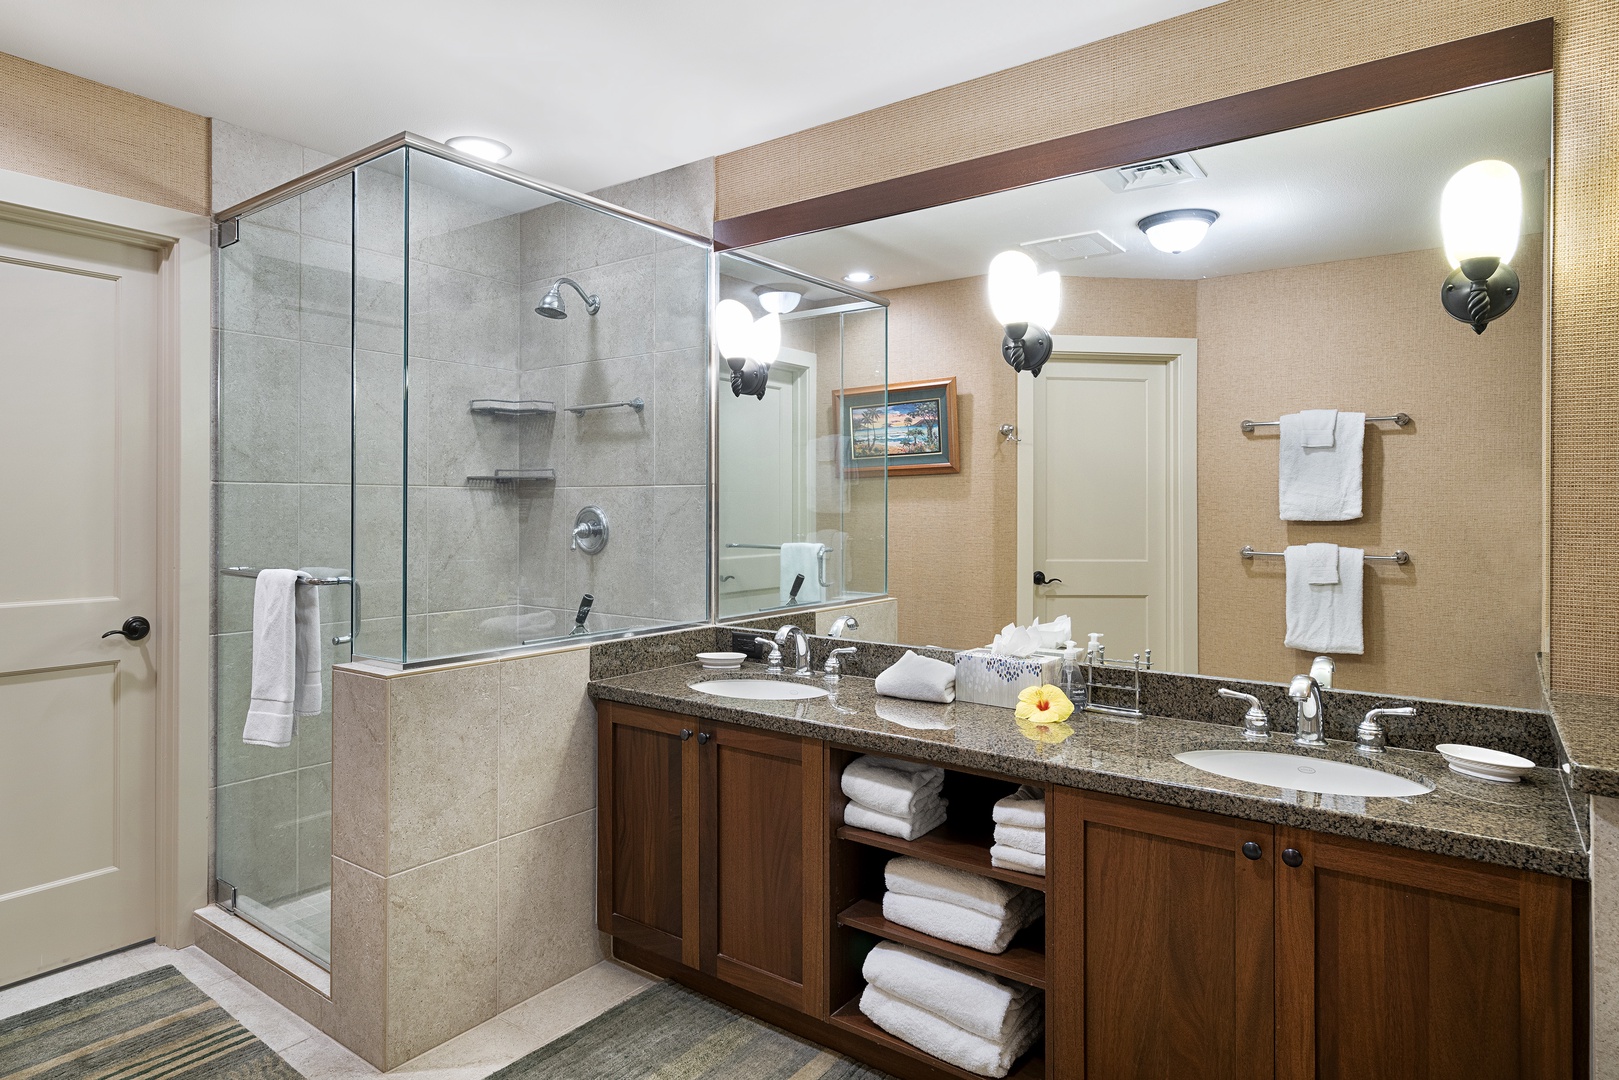 Waikoloa Vacation Rentals, Hali'i Kai at Waikoloa Beach Resort 9F - Dual vanities and walk-in shower featured in the Primary Bath!